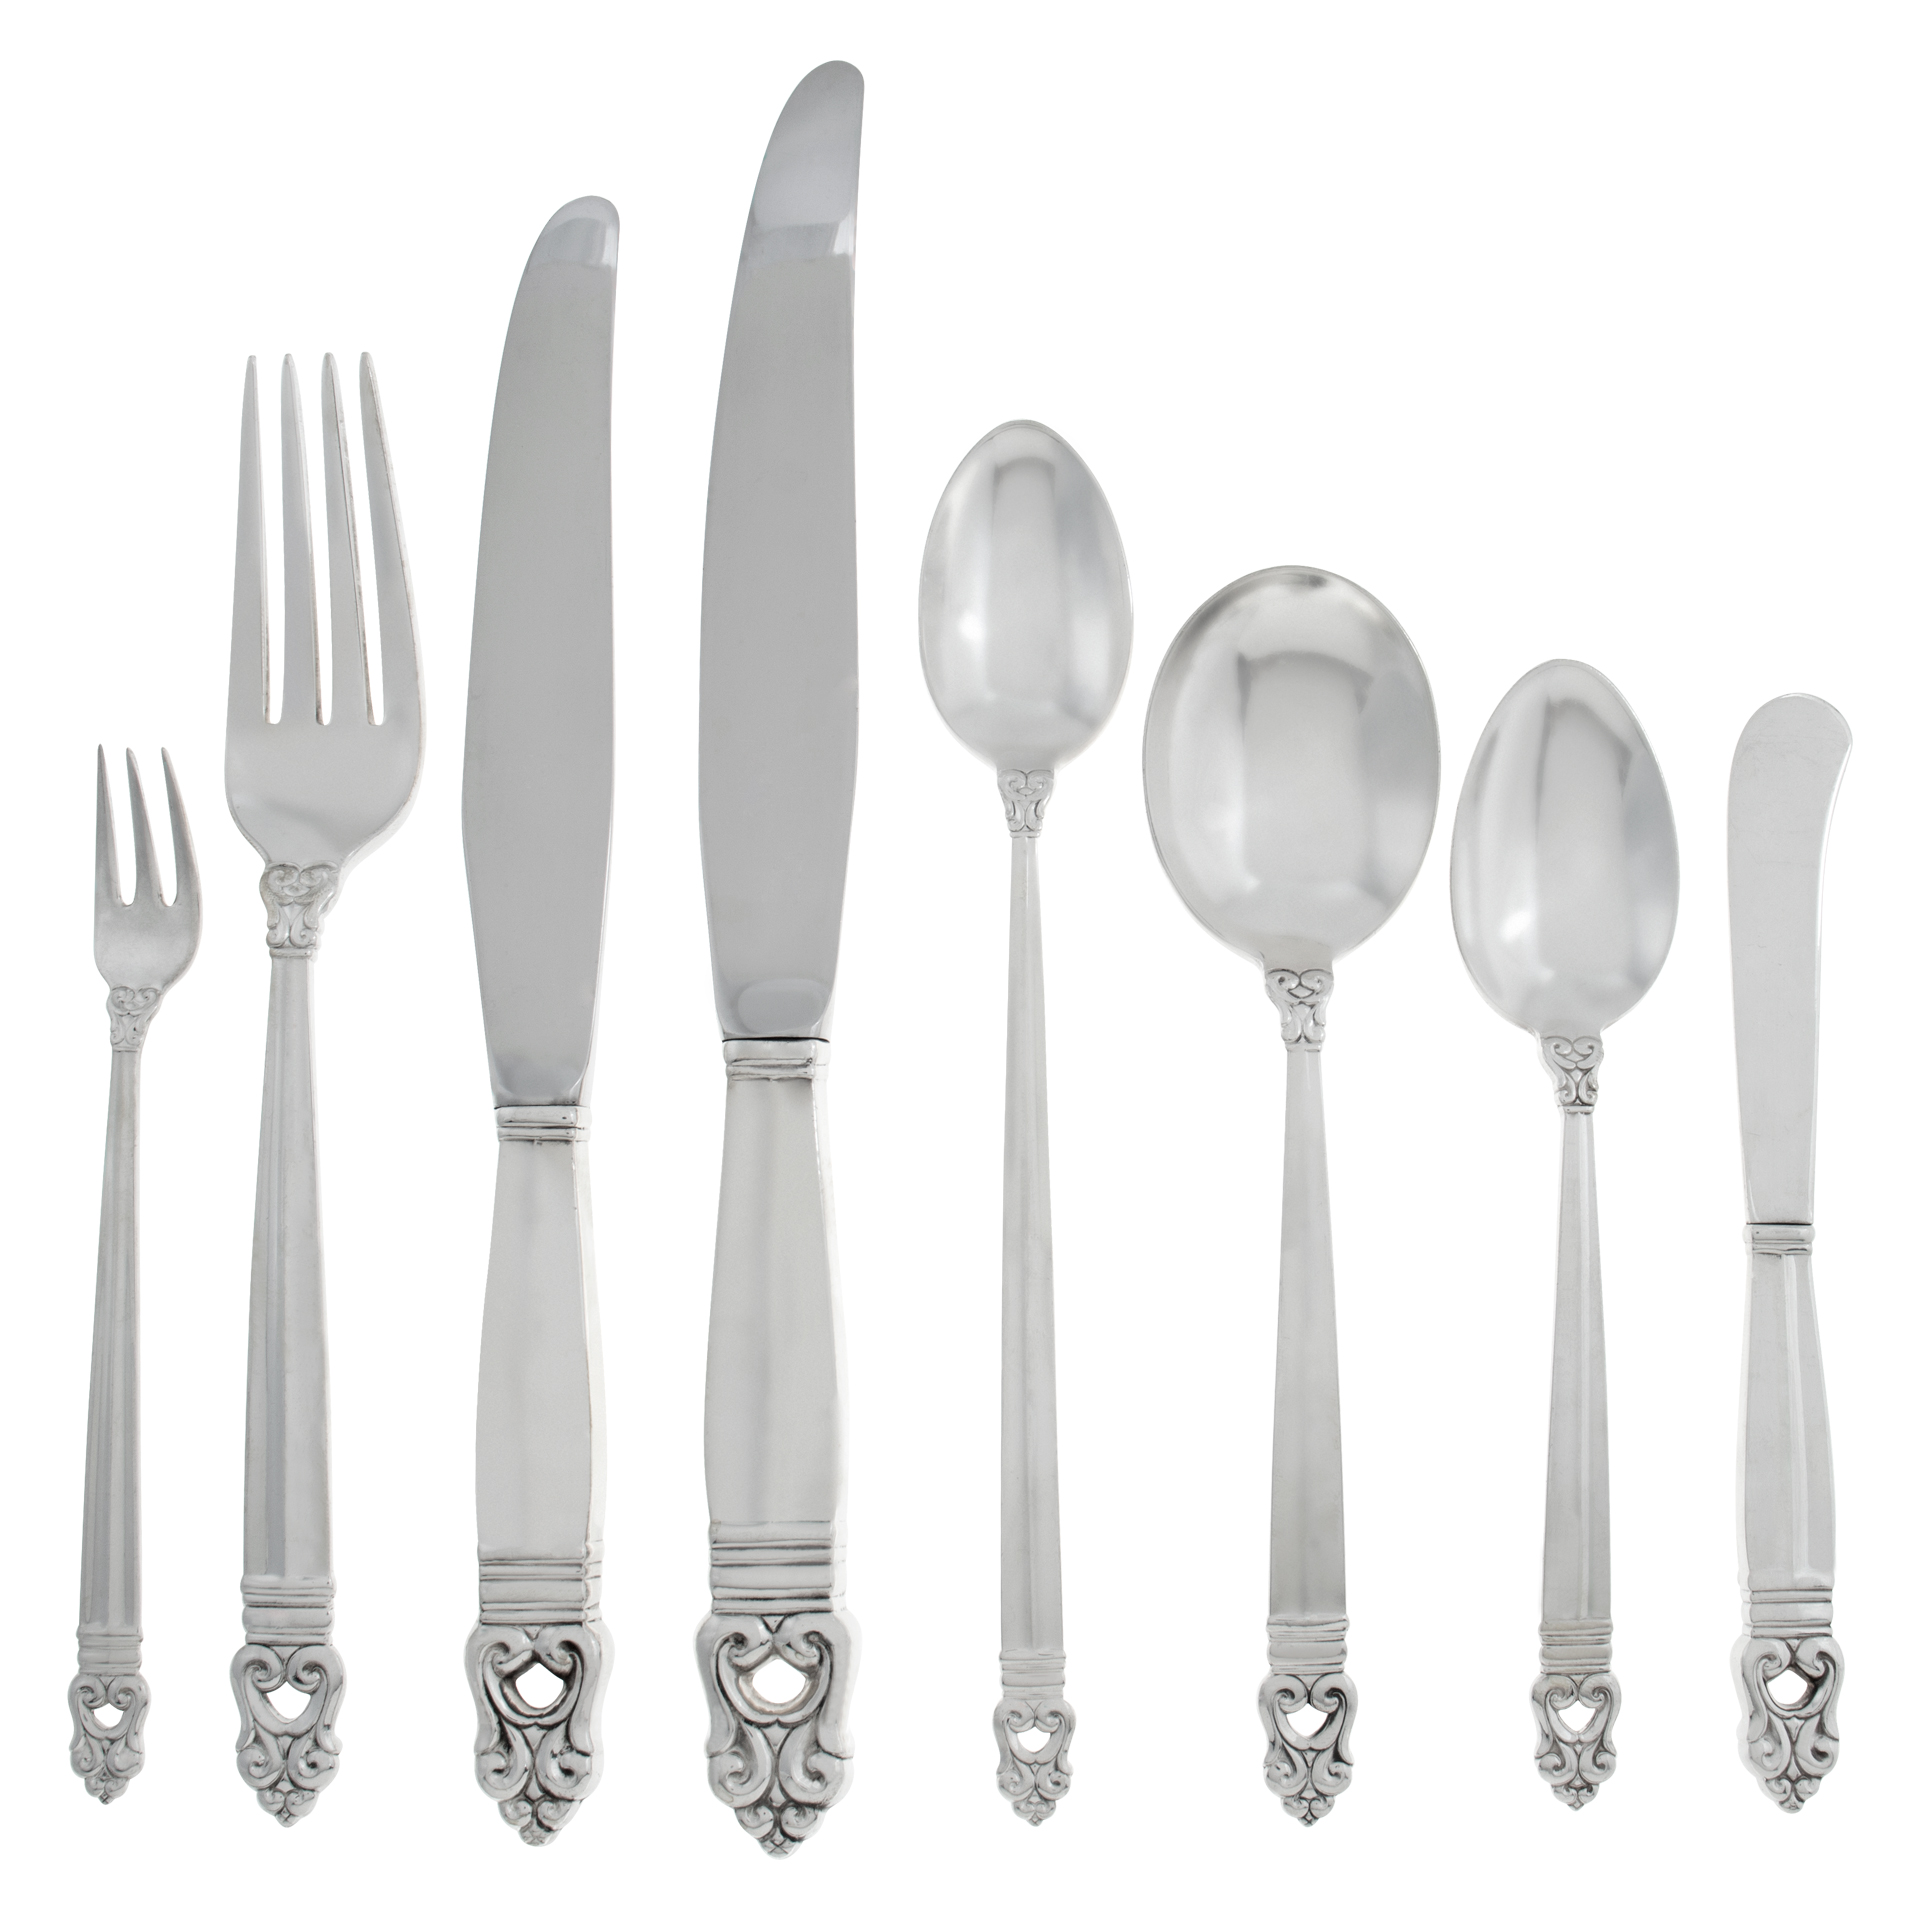 ROYAL DANISH sterling silver flatware st, ptd in 1939 by International. 65 pieces, 7 place set x 8 + 12 Serving.